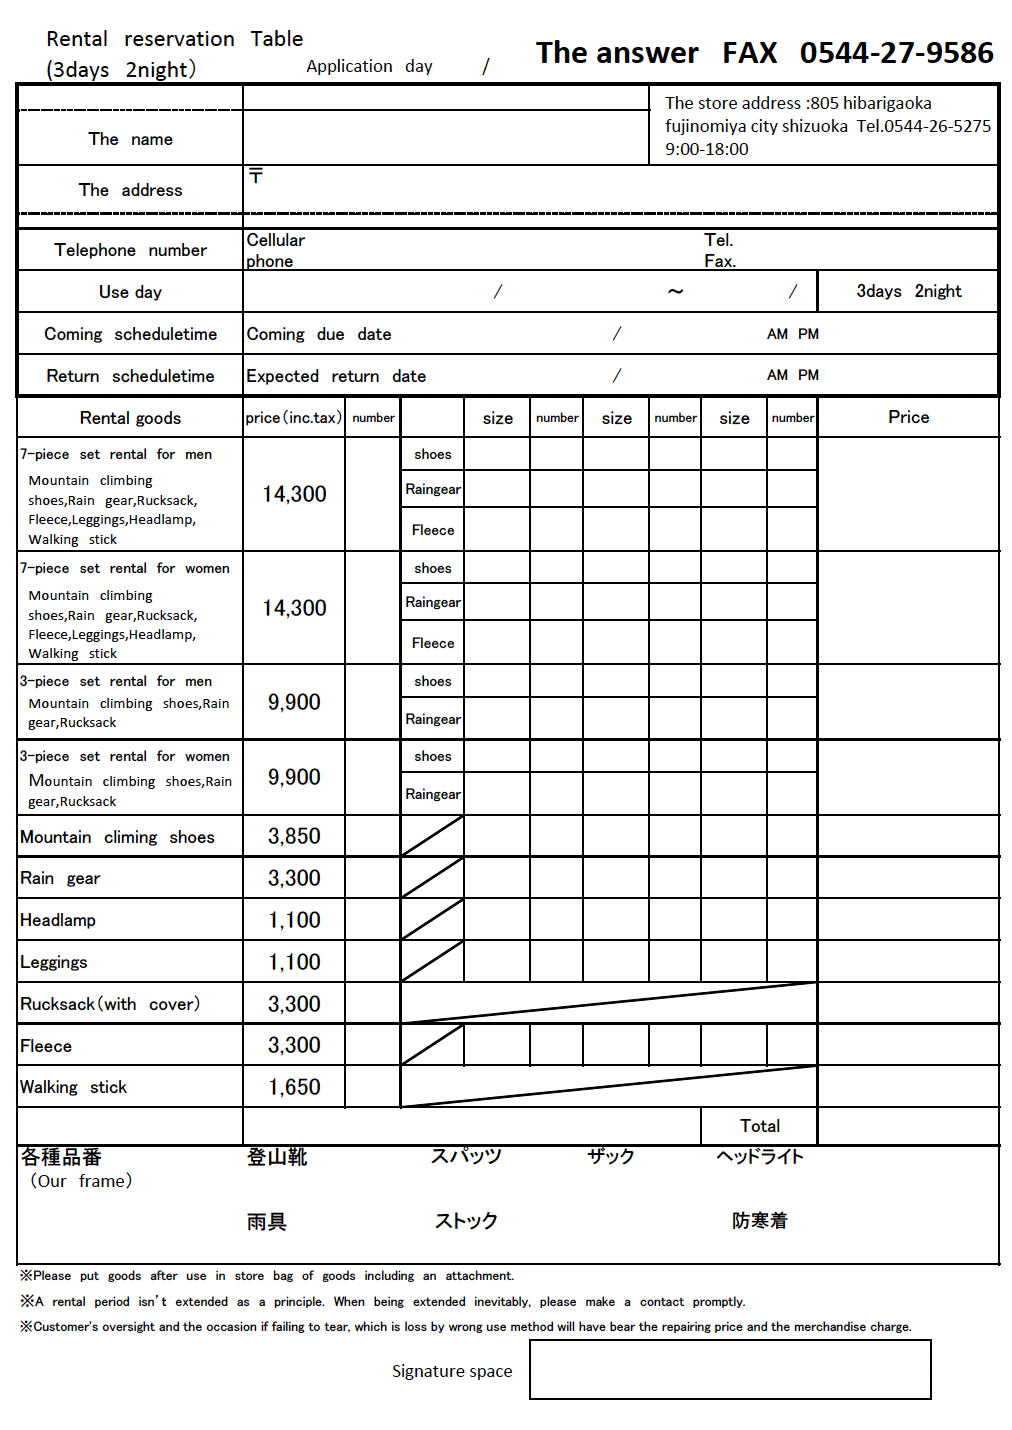 Fax reservation application form